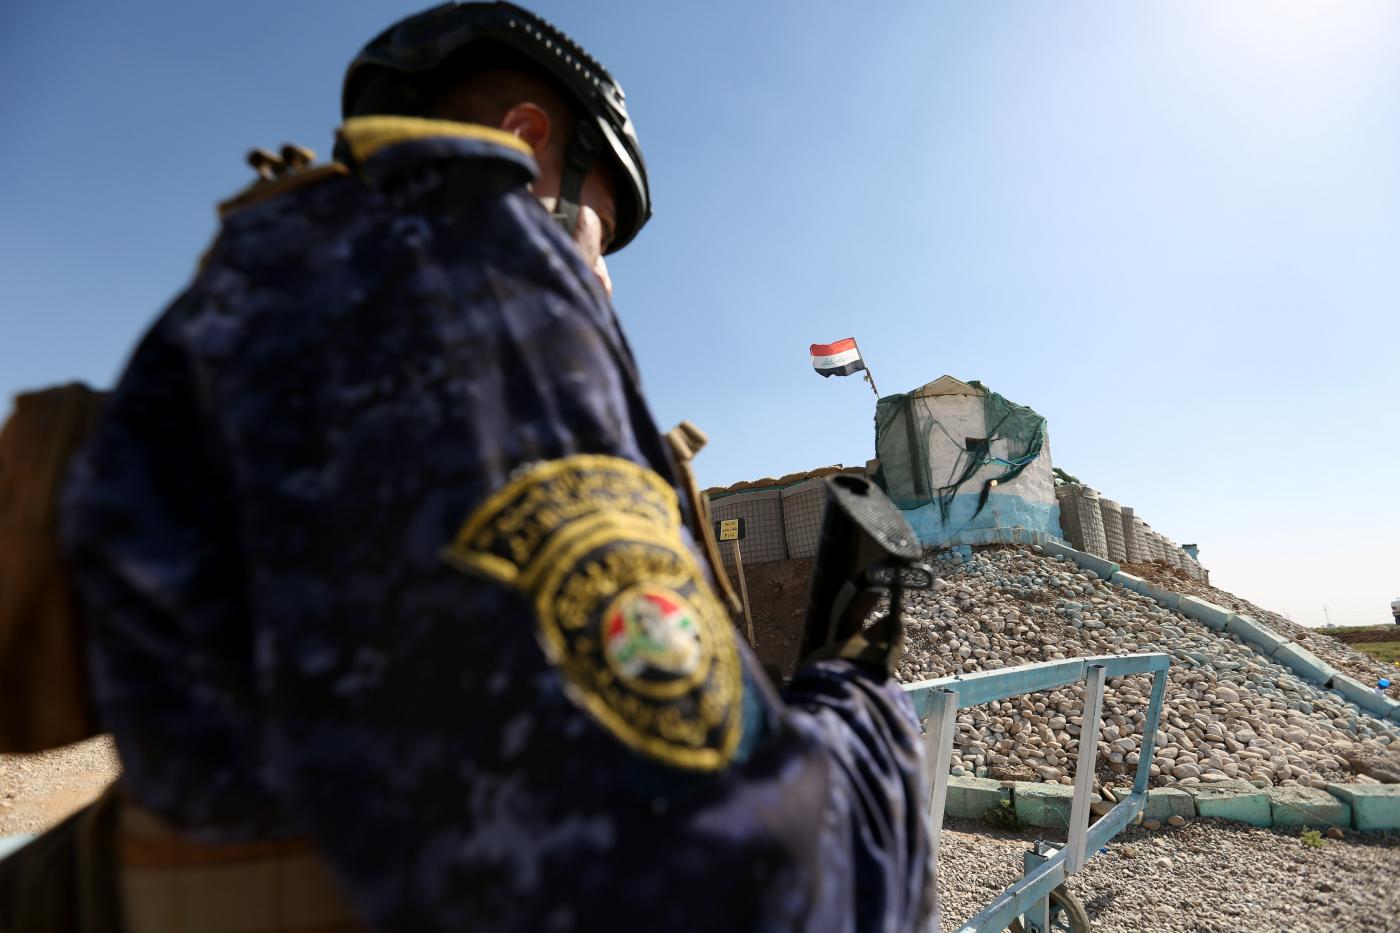 A police officer on duty at a guard post in Al-Rashad, southwestern Kirkuk province, similar to the one attacked on 4 September (MEE/Mohammed Aqeel)